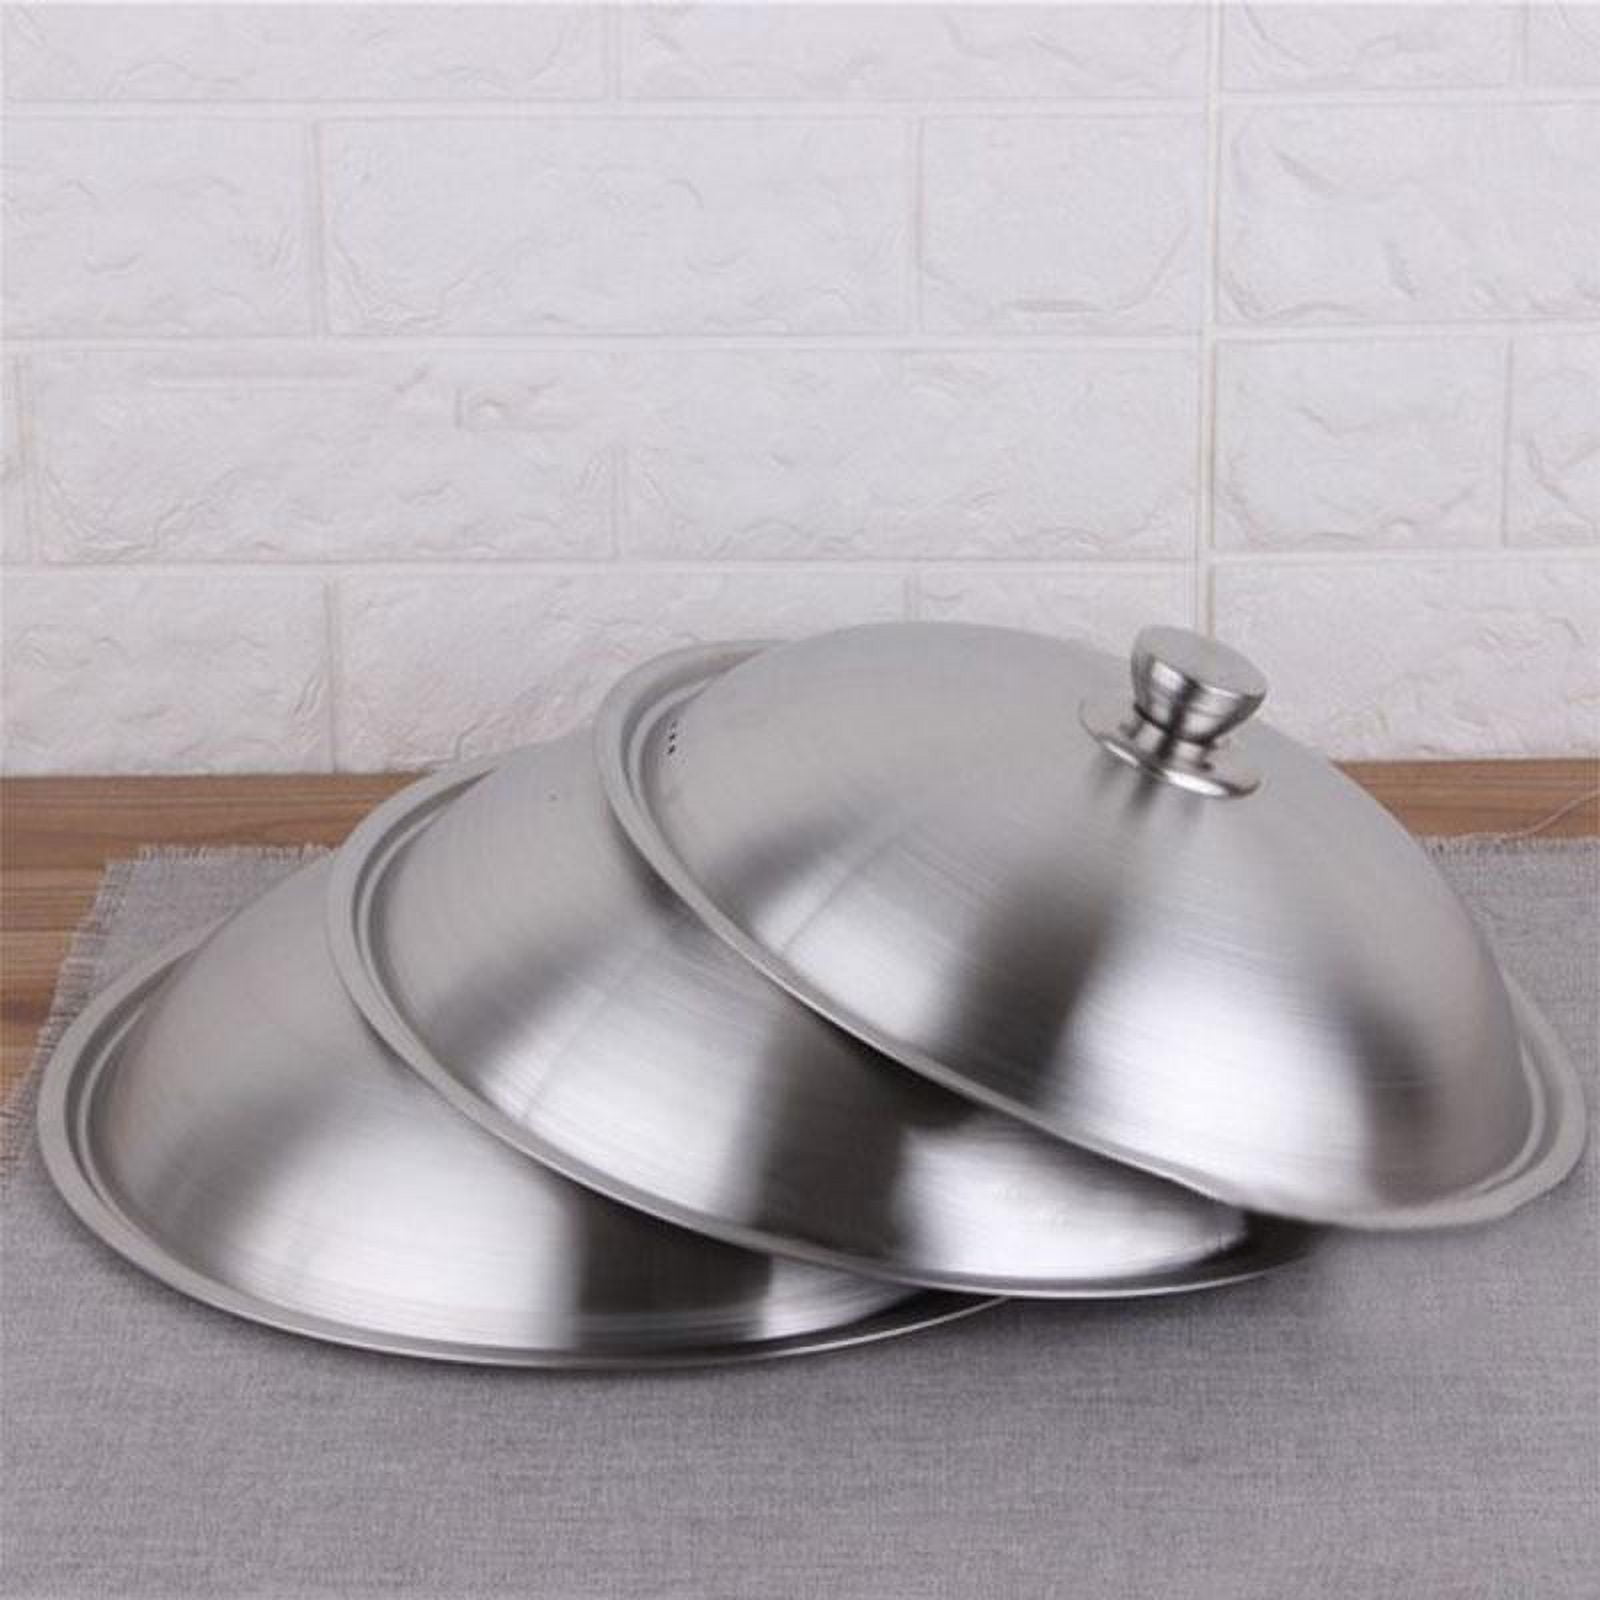 Stainless Steel Pan Lid Universal Pot Lid Frying Pan Cover Pot and Pan Lid for Kitchen, Size: 26x26x4CM